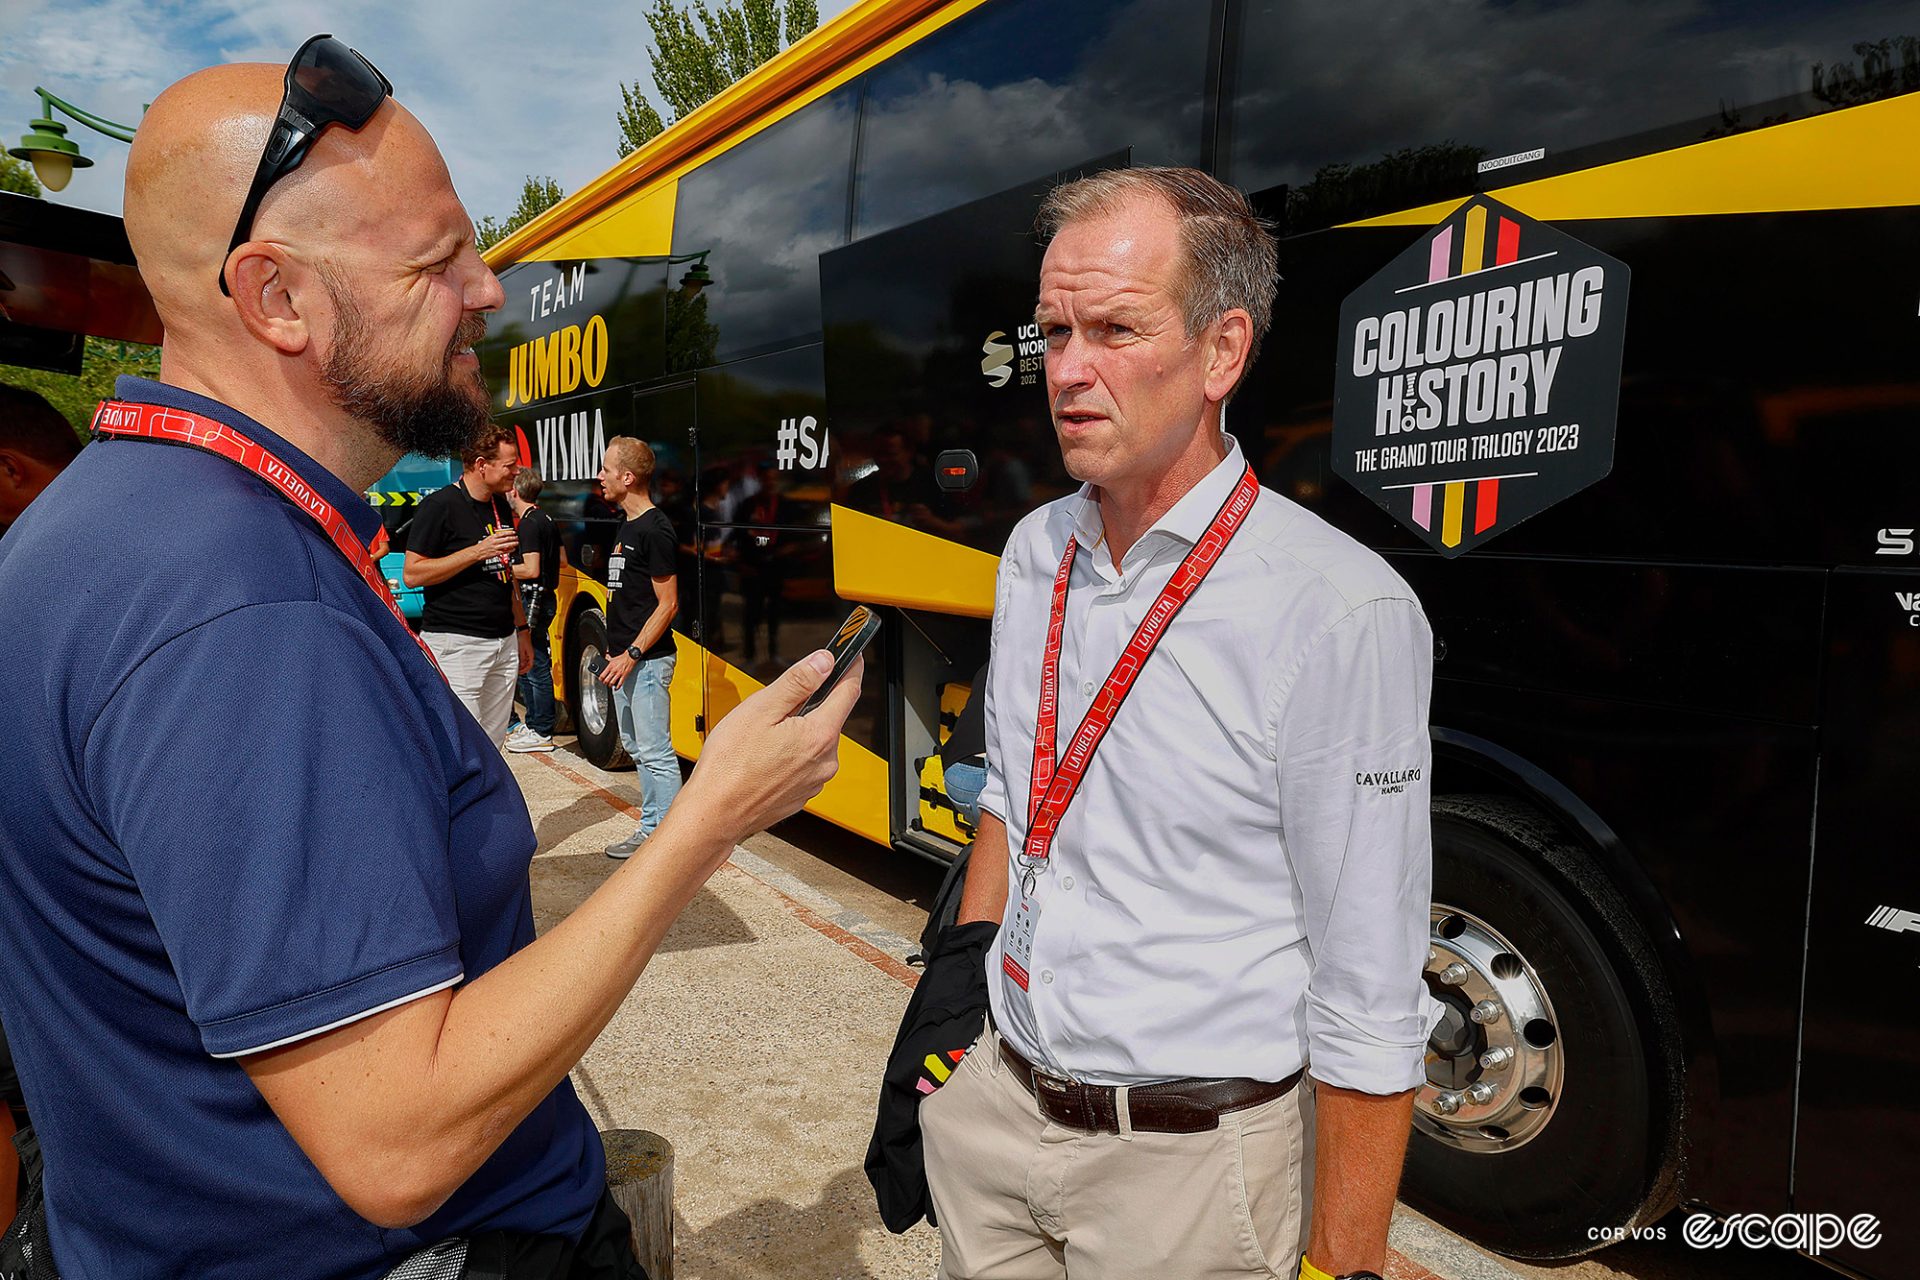 Jumbo-Visma manager RIchard Plugge speaks with a journalist outside the team bus at the 2023 Vuelta a España.